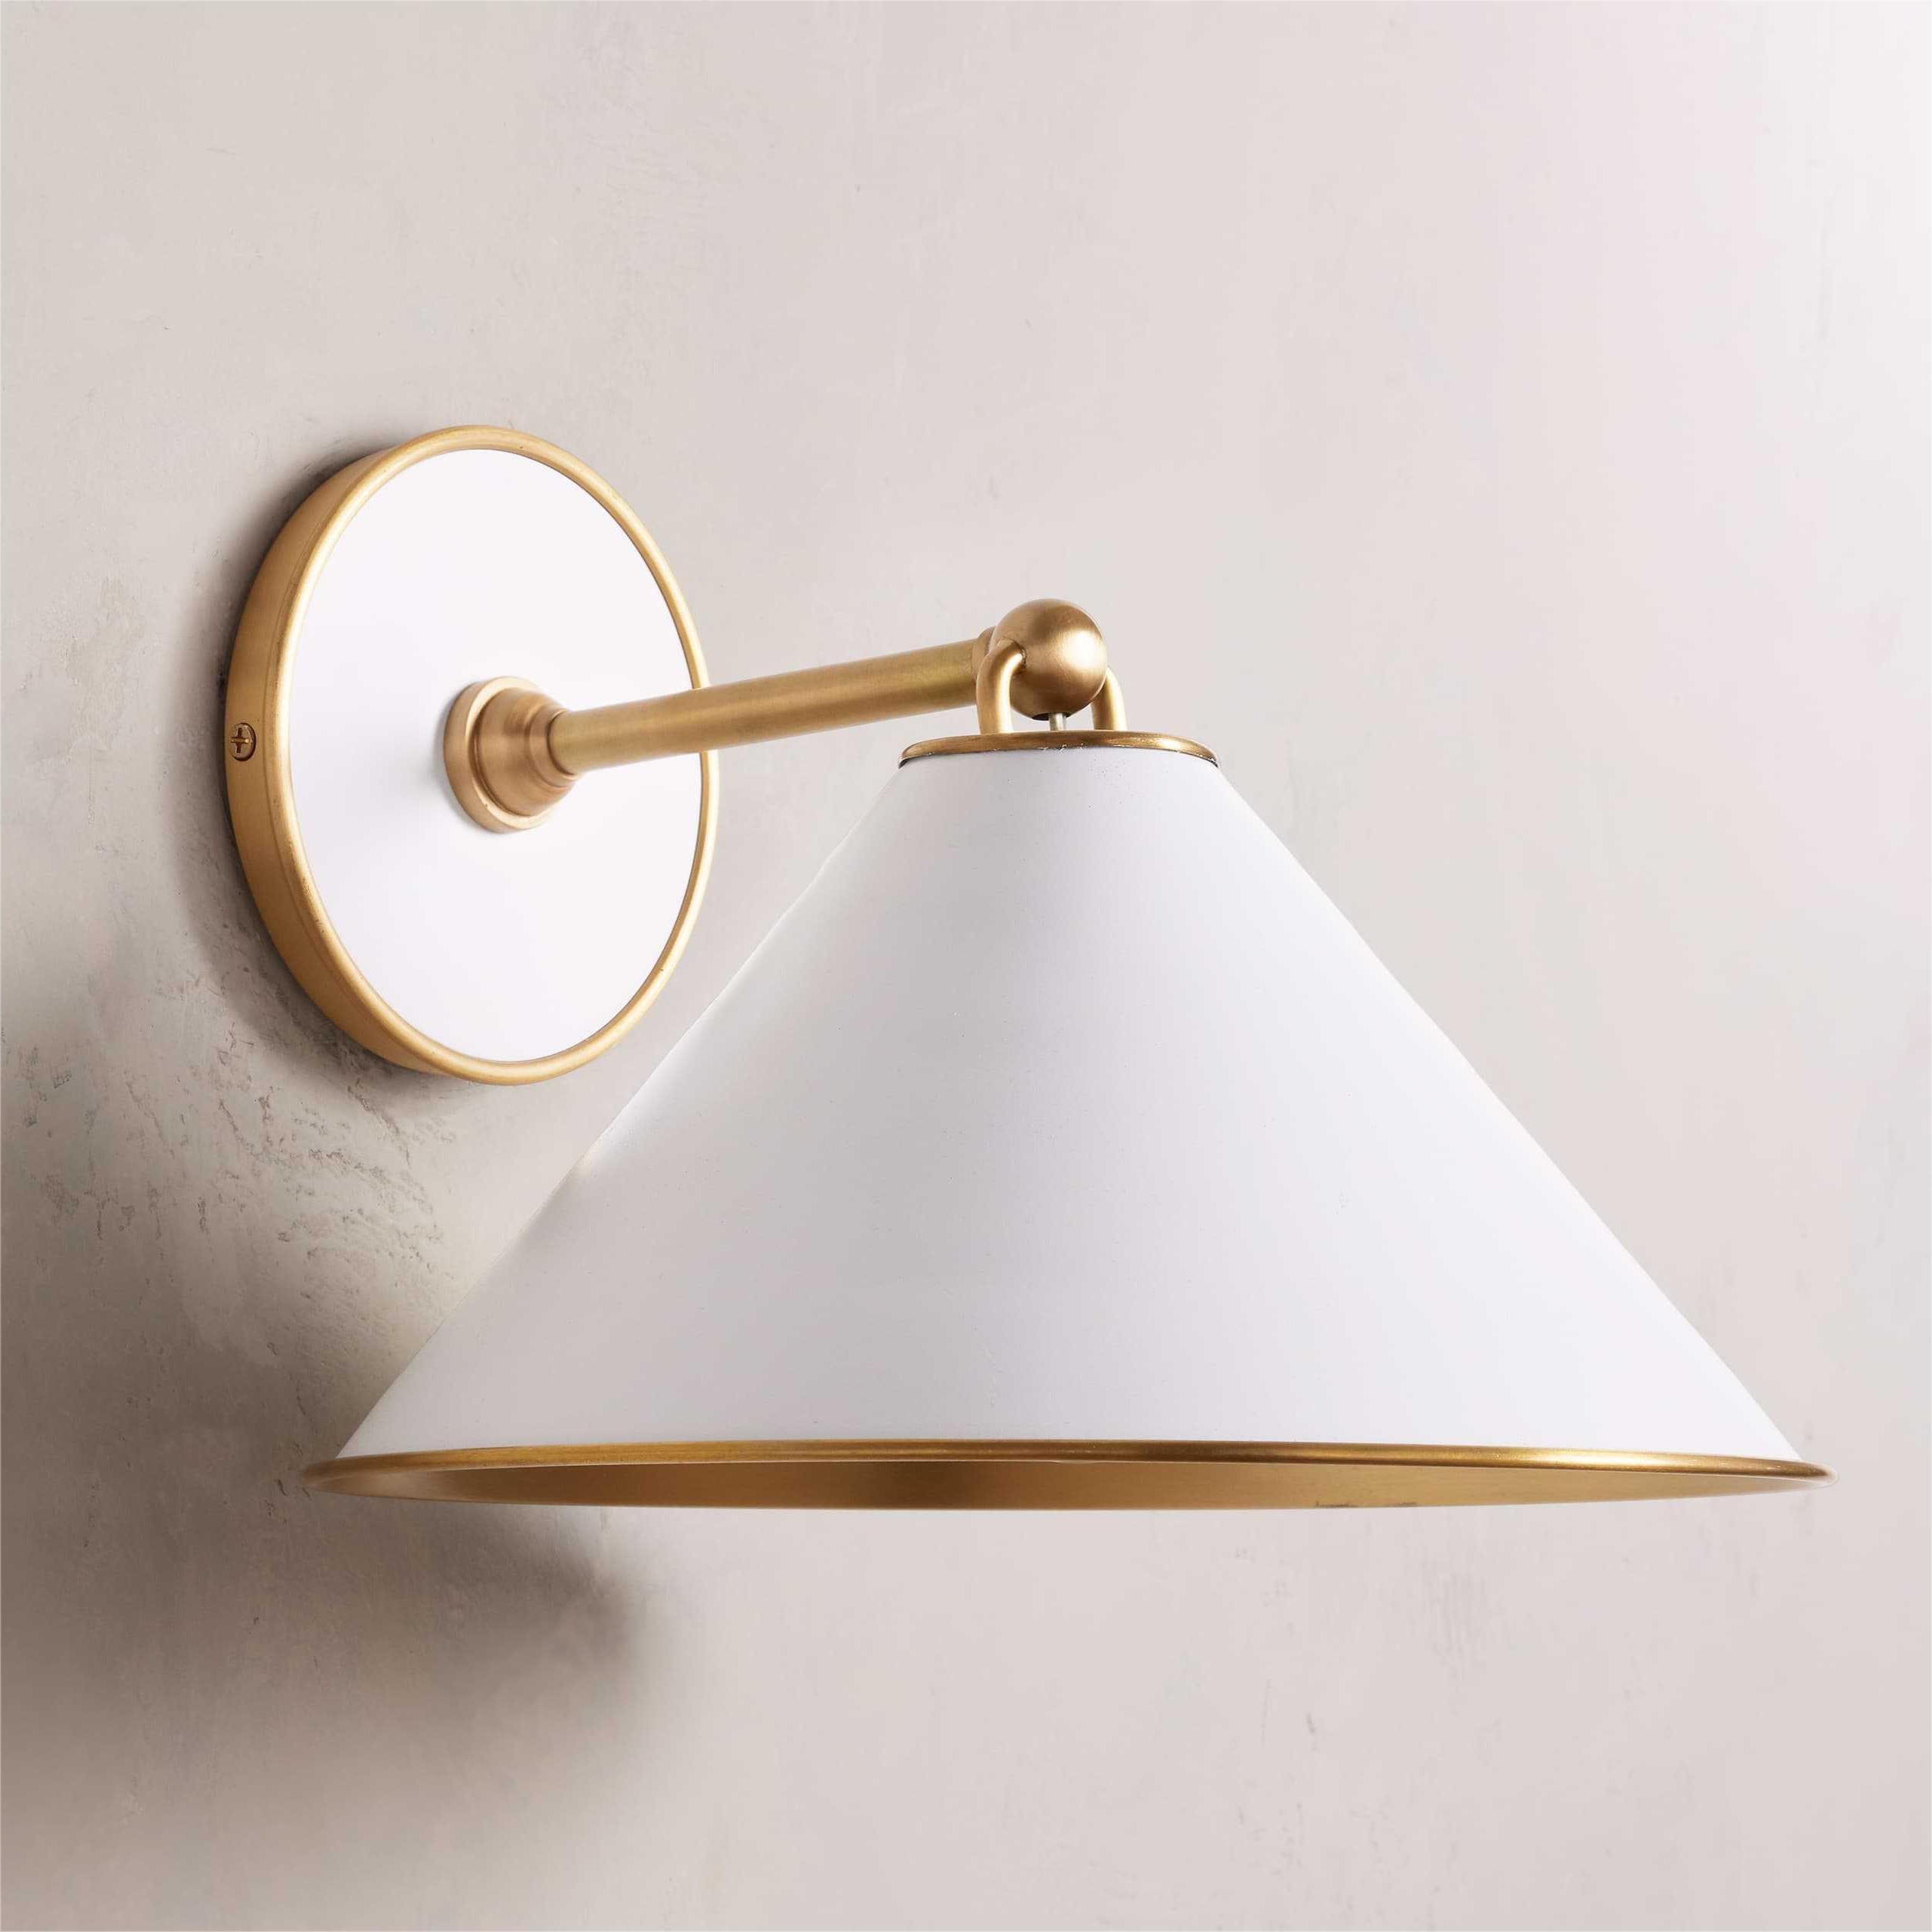 Arno Wall Sconce